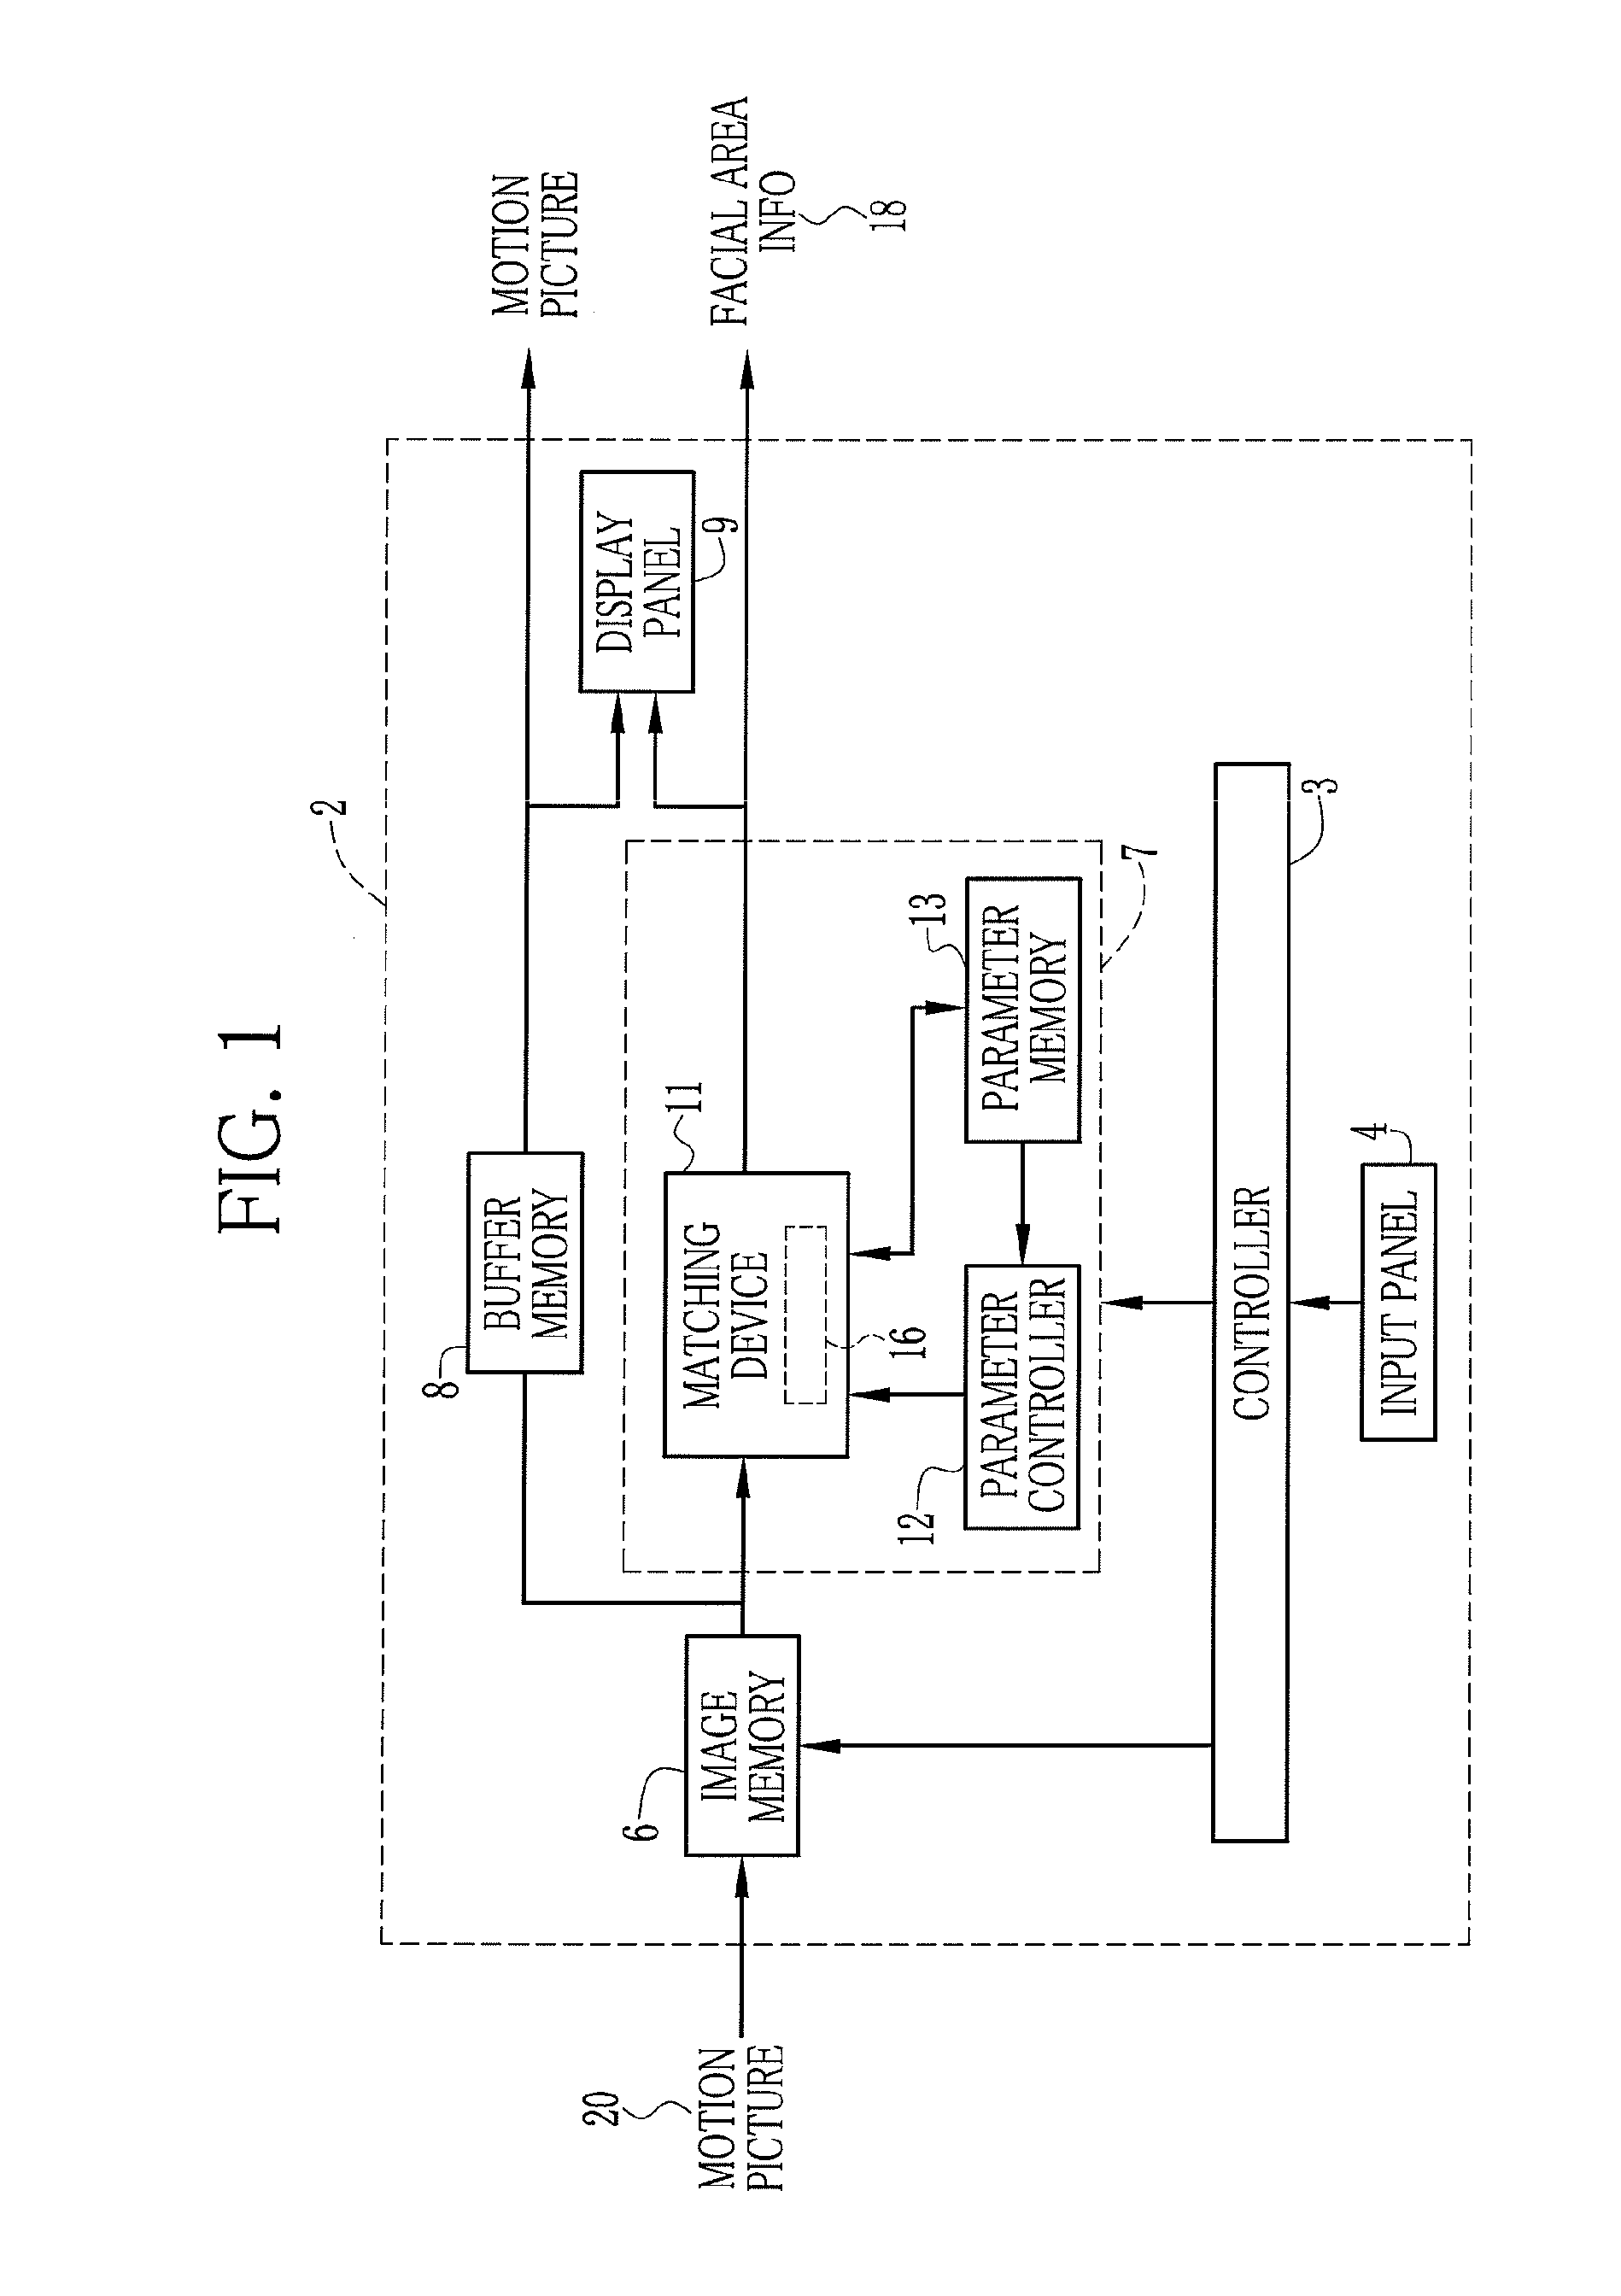 Face detector and face detecting method